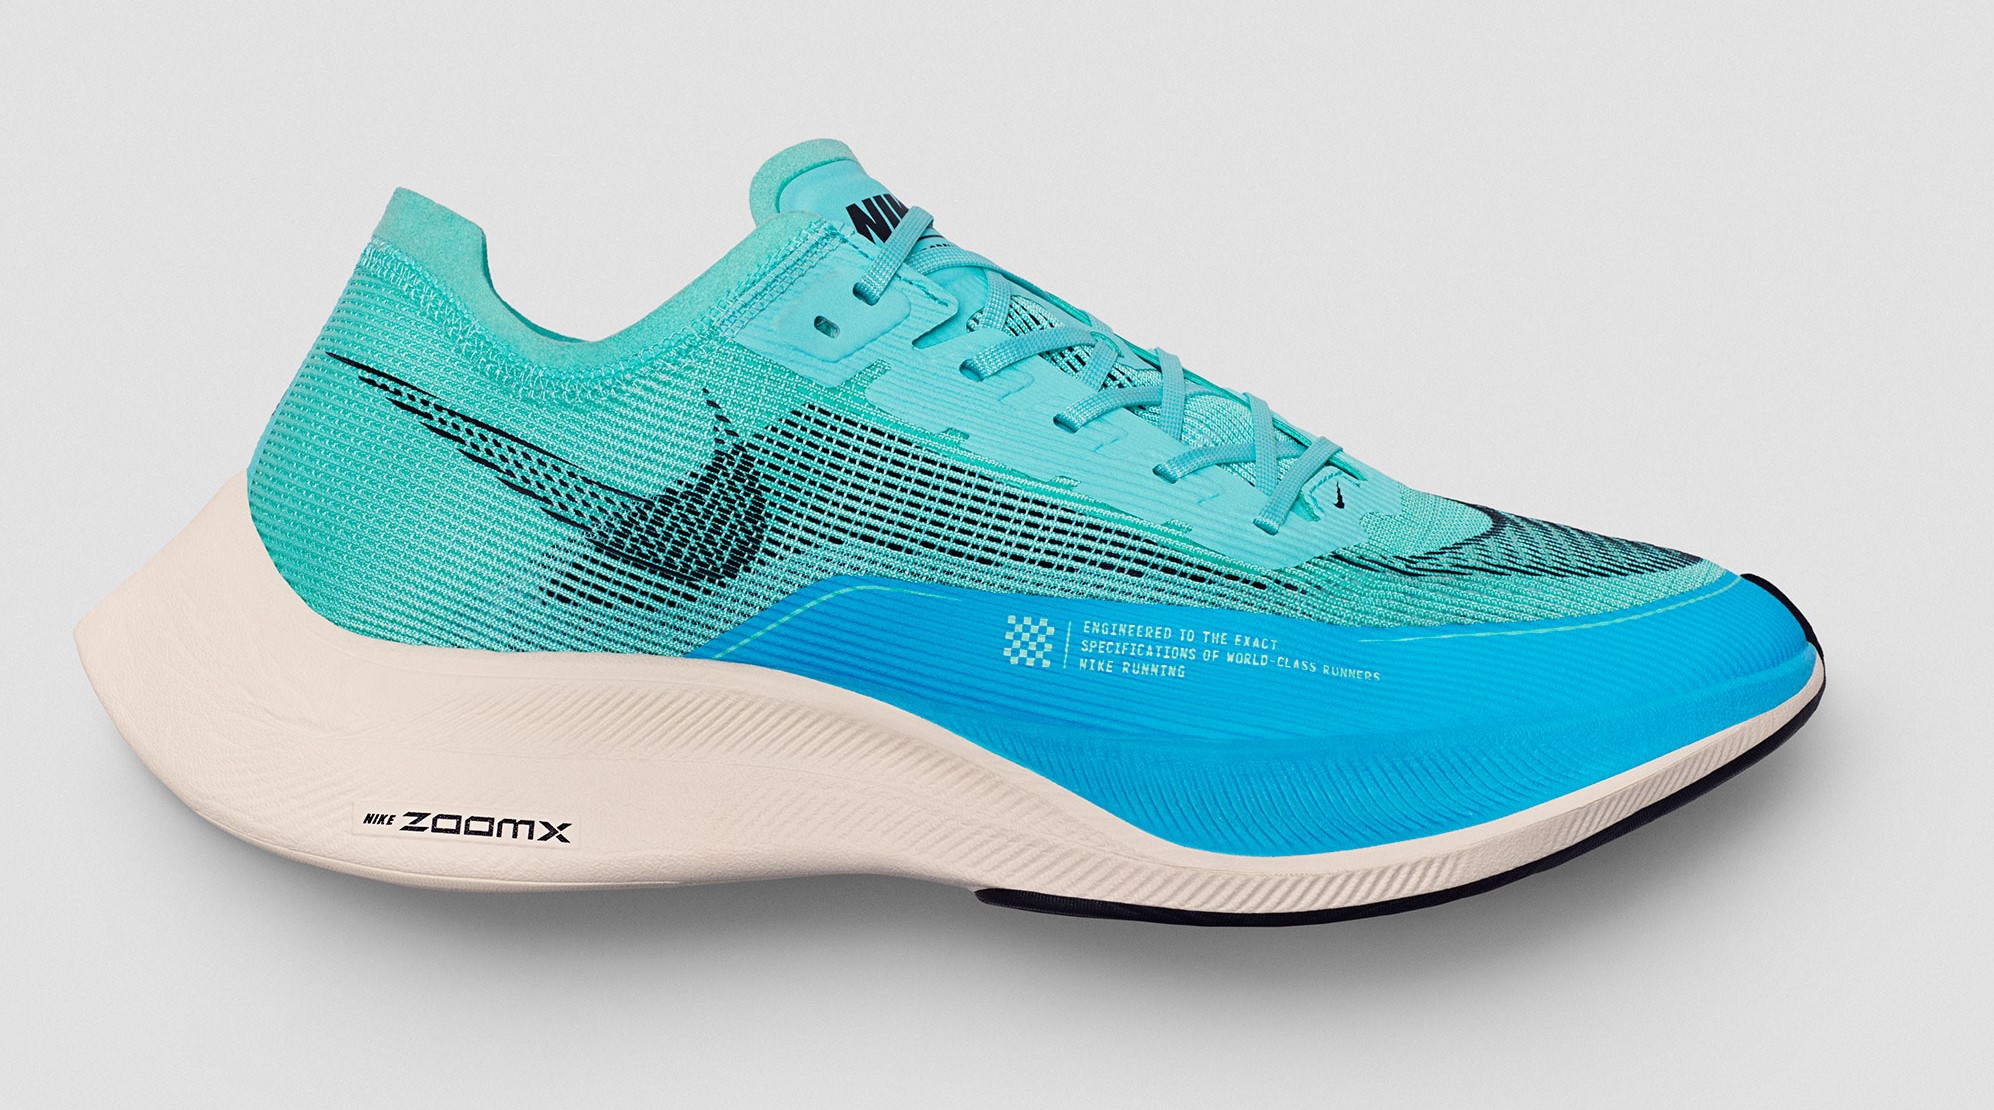 NIKE RUNNING “NIKE ZoomX Vaporfly NEXT% 2” New color | SHOES MASTER